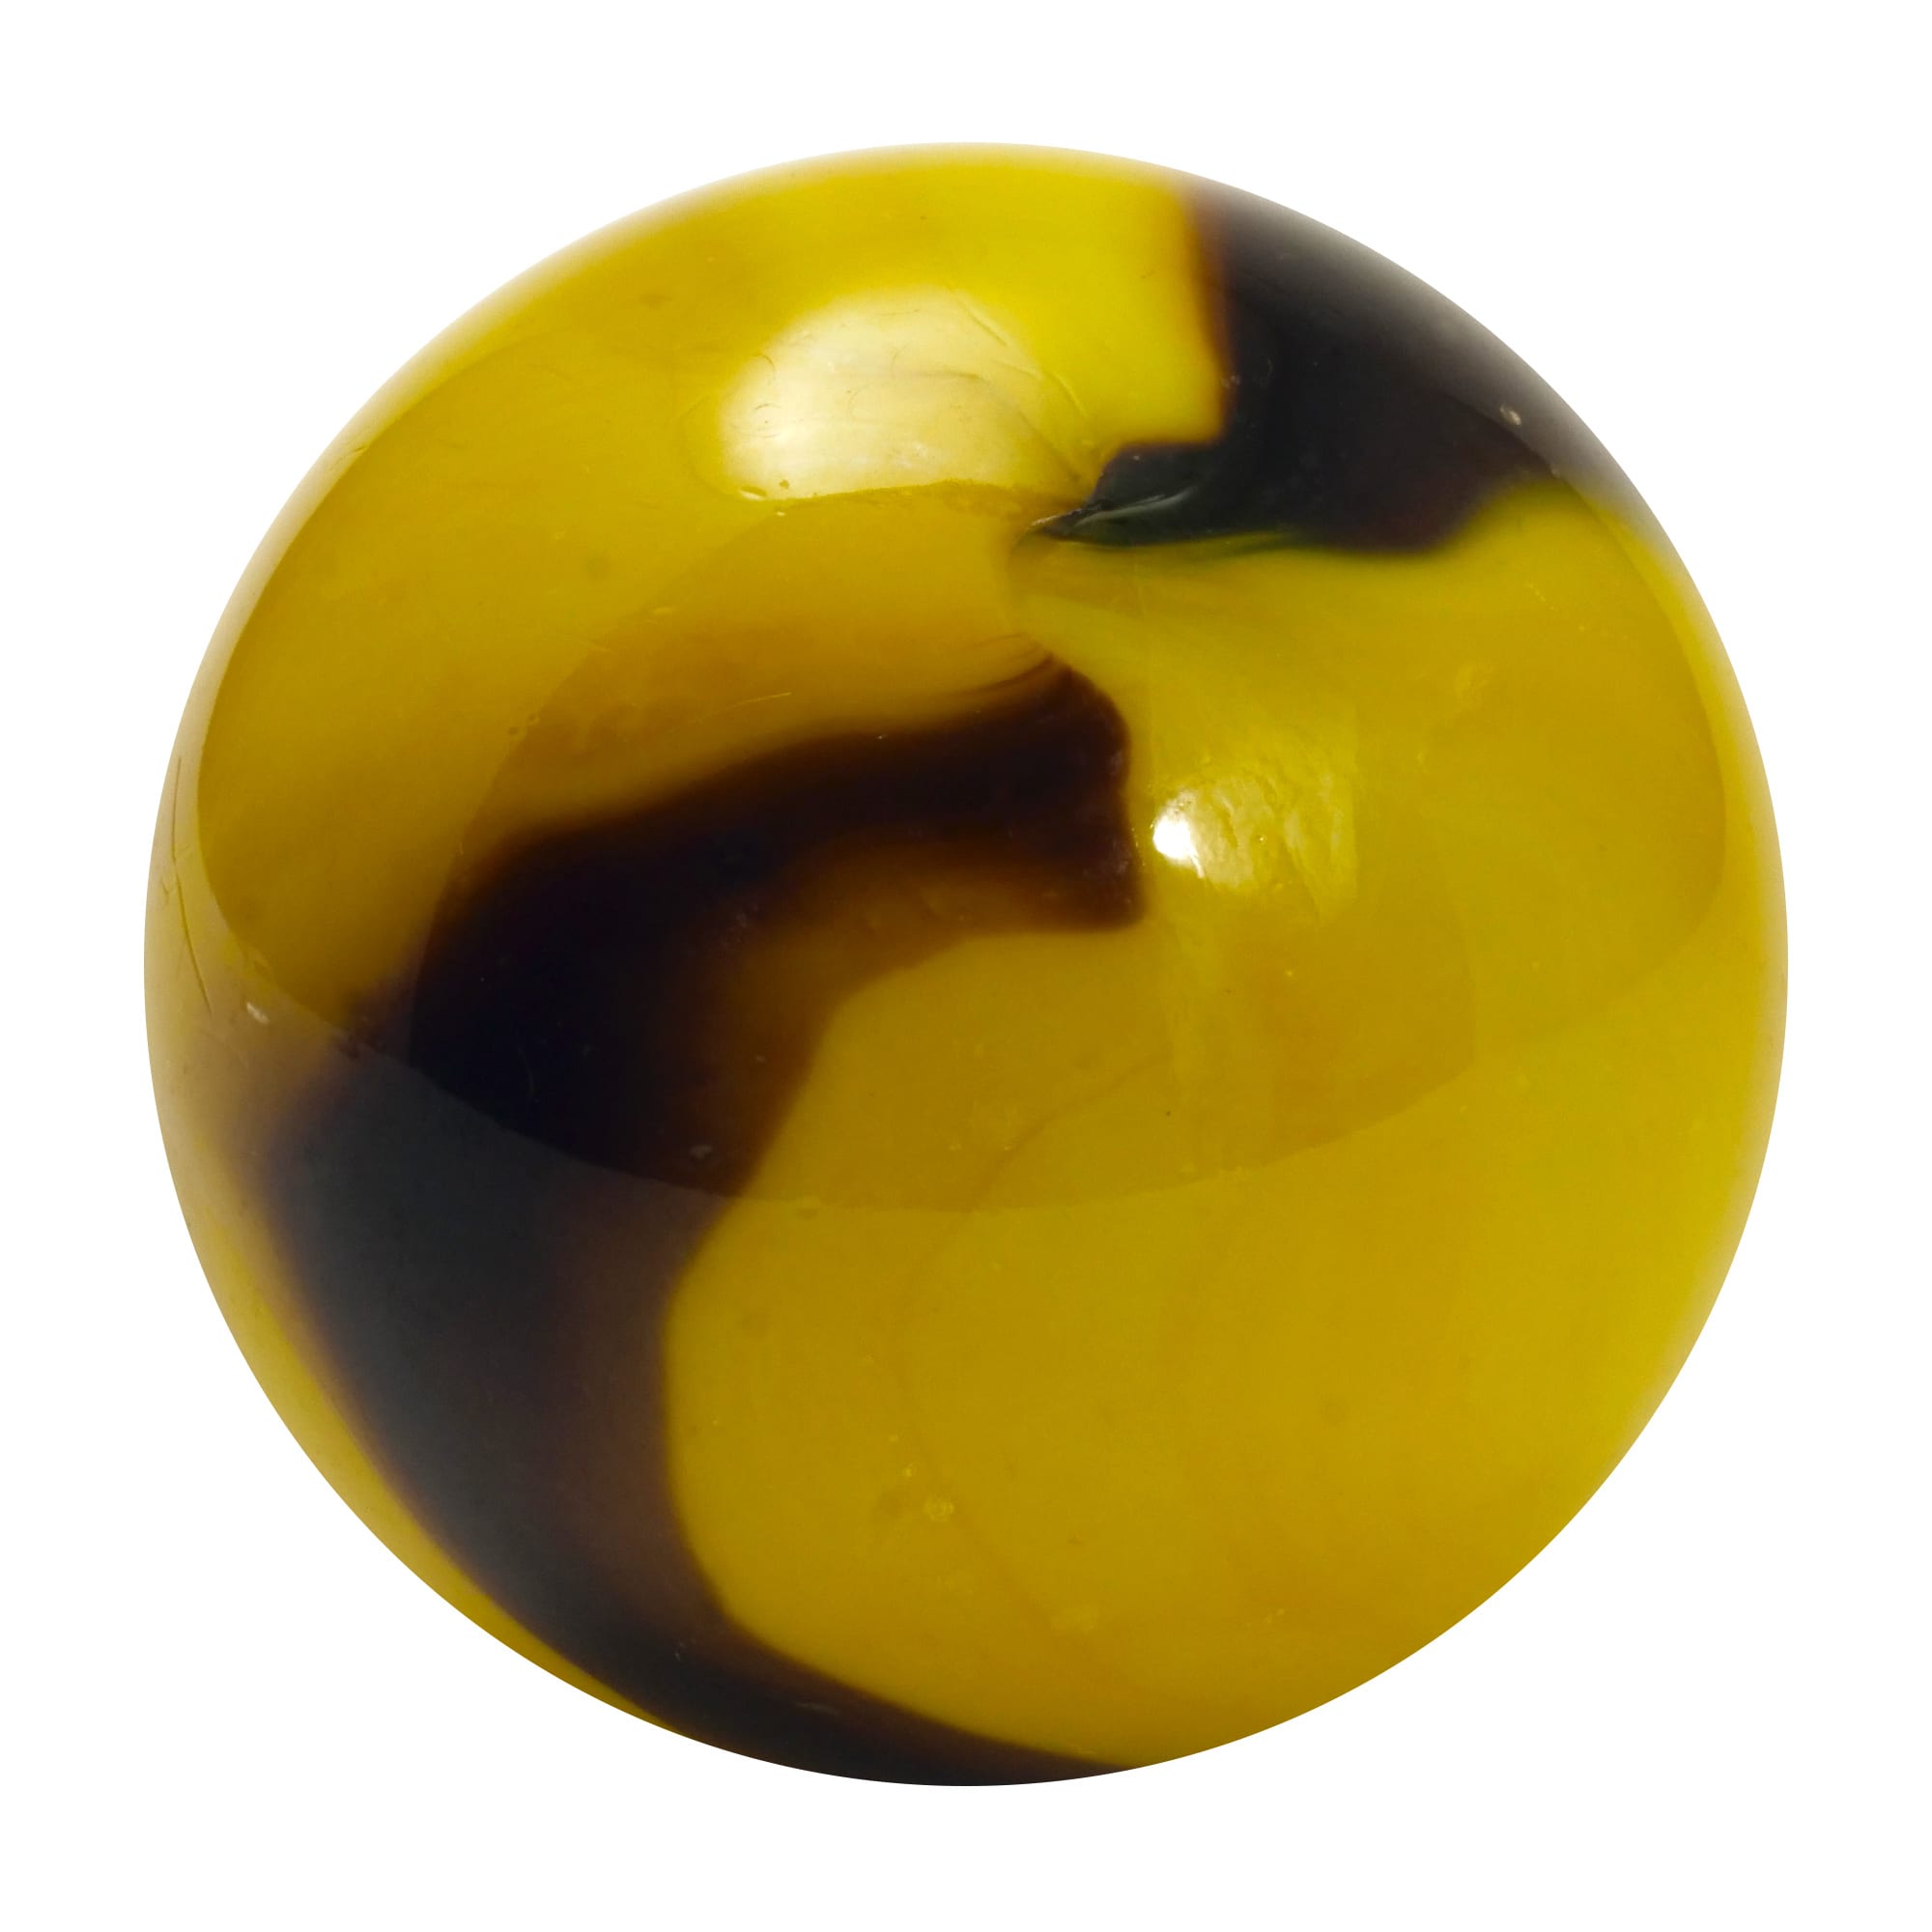 VACOR MARBLES FREE SHIPPING 2 POUNDS 9/16 INCH BUMBLEBEE MEGA 